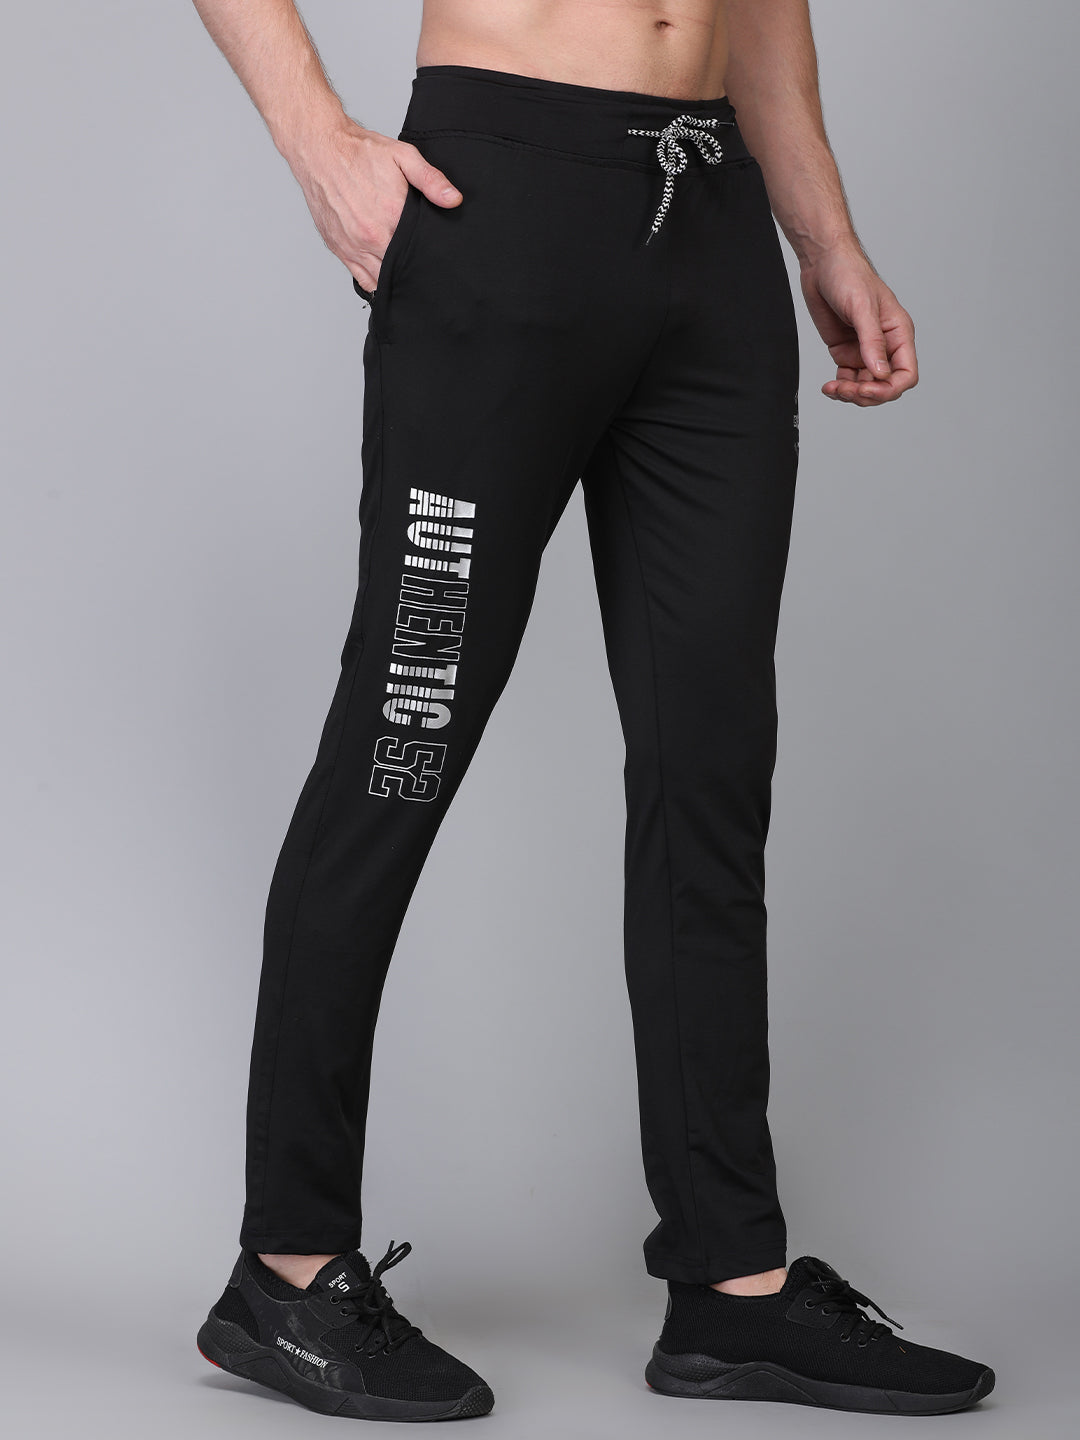 LANGO BRAND DRIFIT TRACK PANTS FOR LADIES AT WHOLESALE AFFORDABLE PRICES  IN INDIA